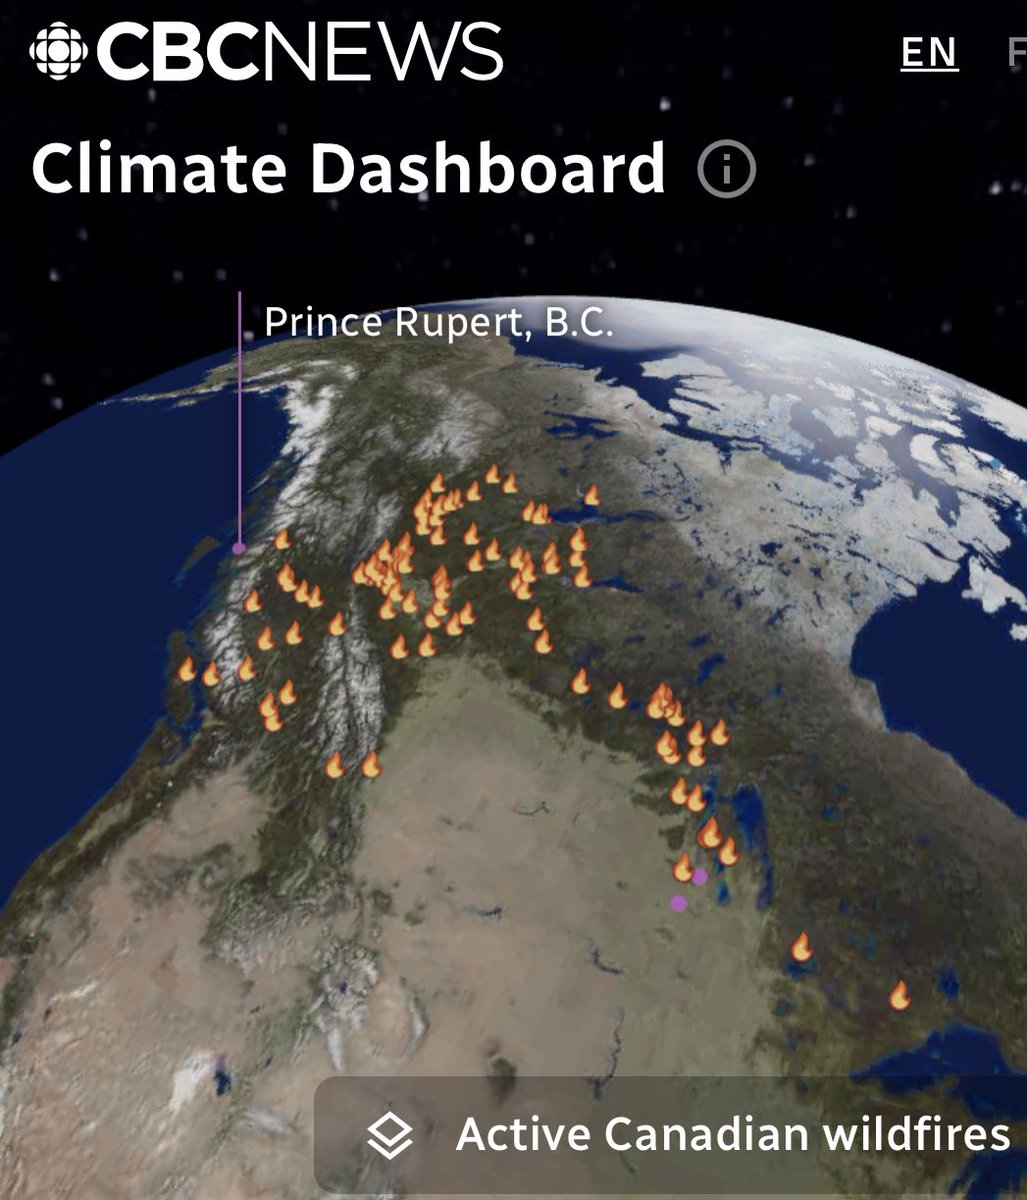 Active Canadian wildfires (and we're only mid-May). This is what the climate emergency looks like. And good on @CBCNews for providing a climate dashboard that shows the impacts of climate change in Canada.